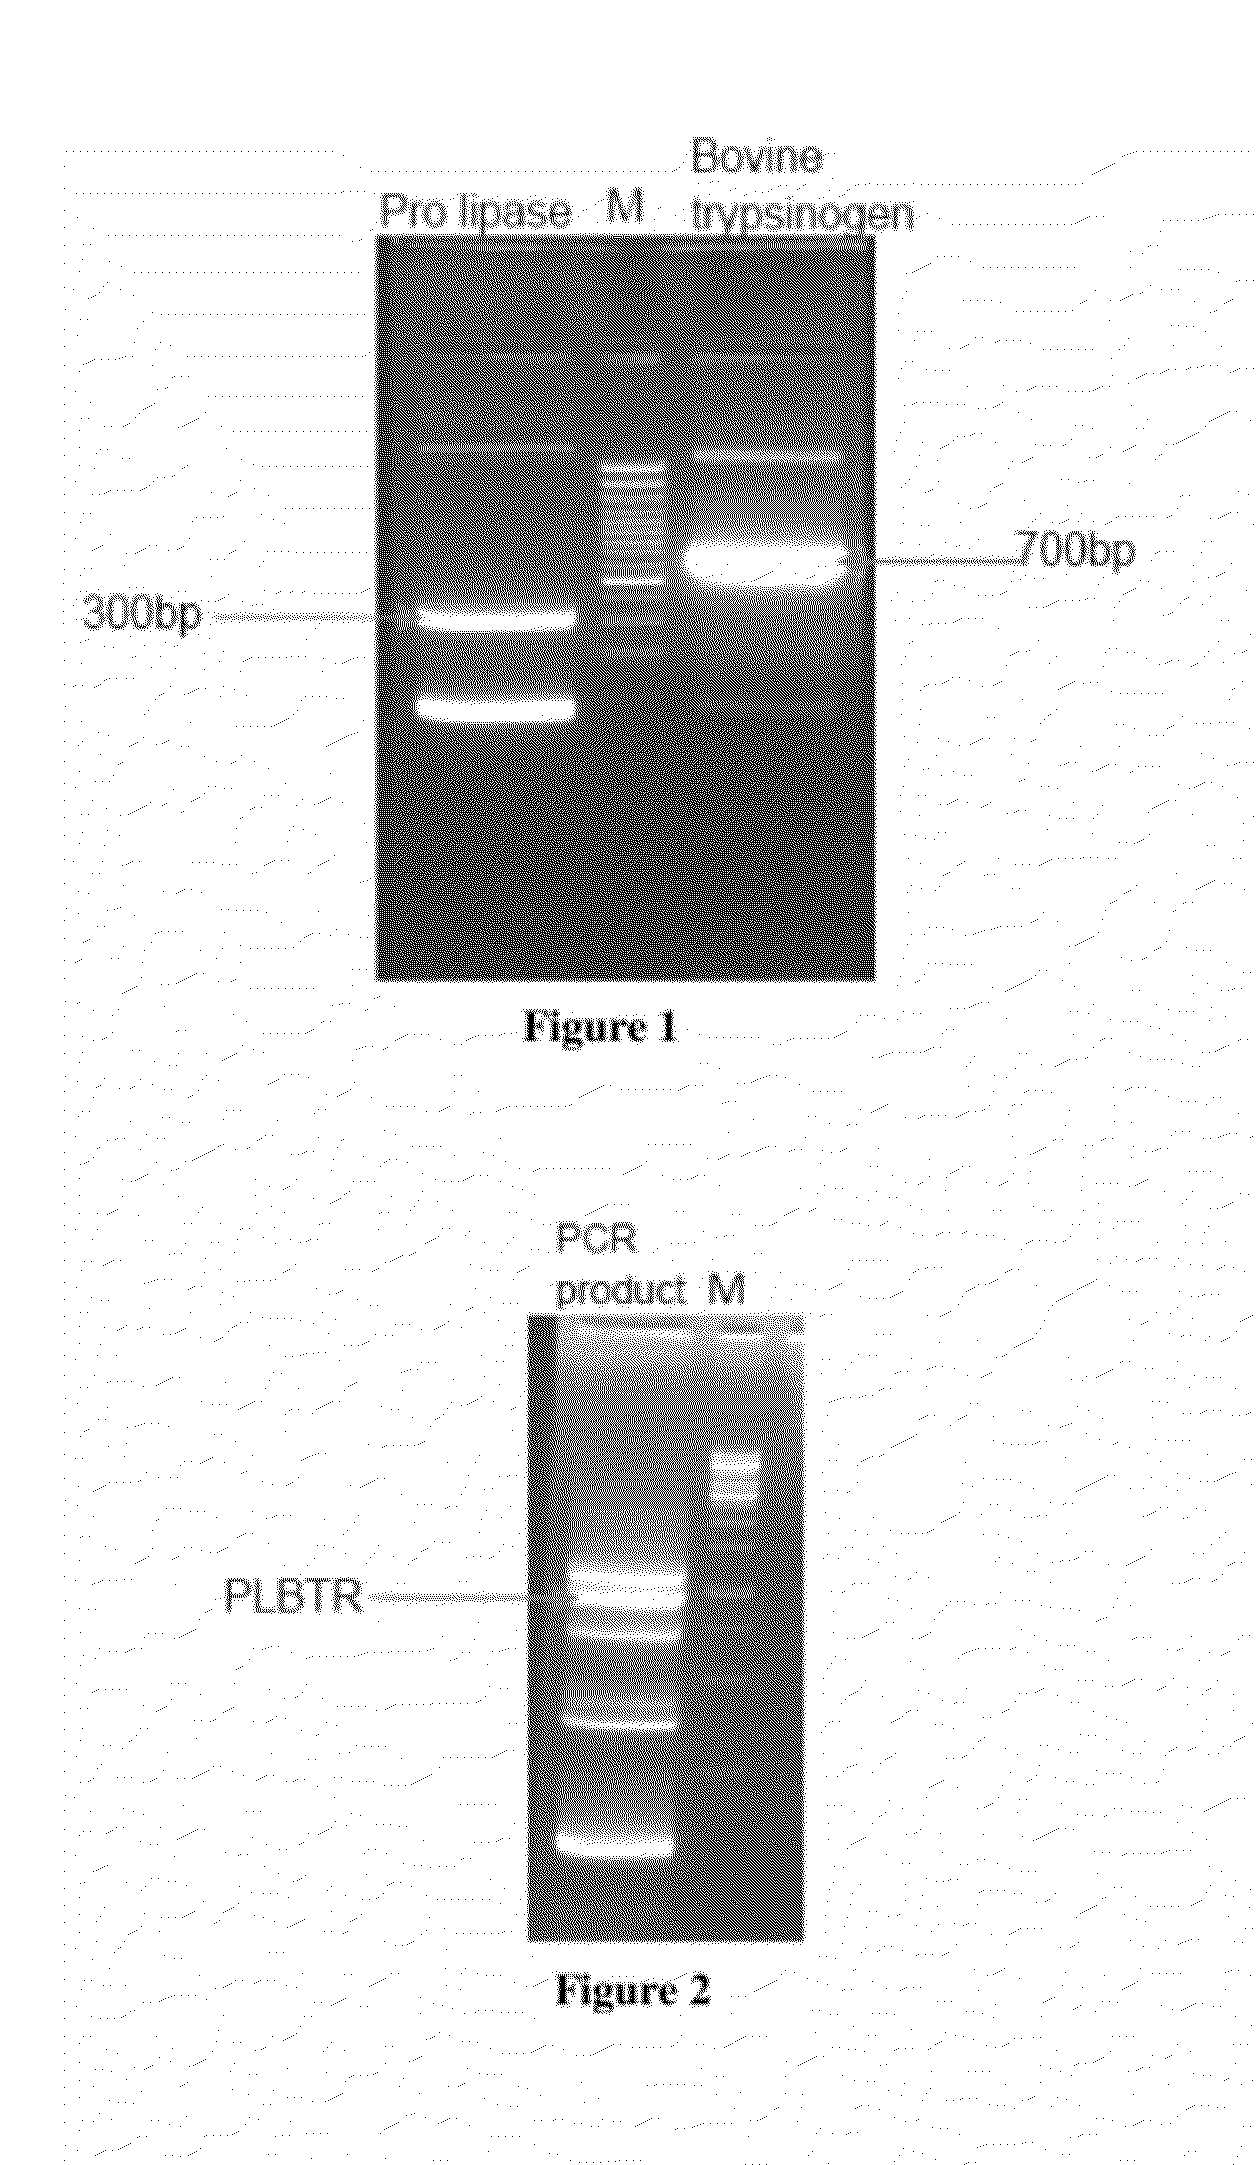 Novel fusion proteins and method of expression thereof